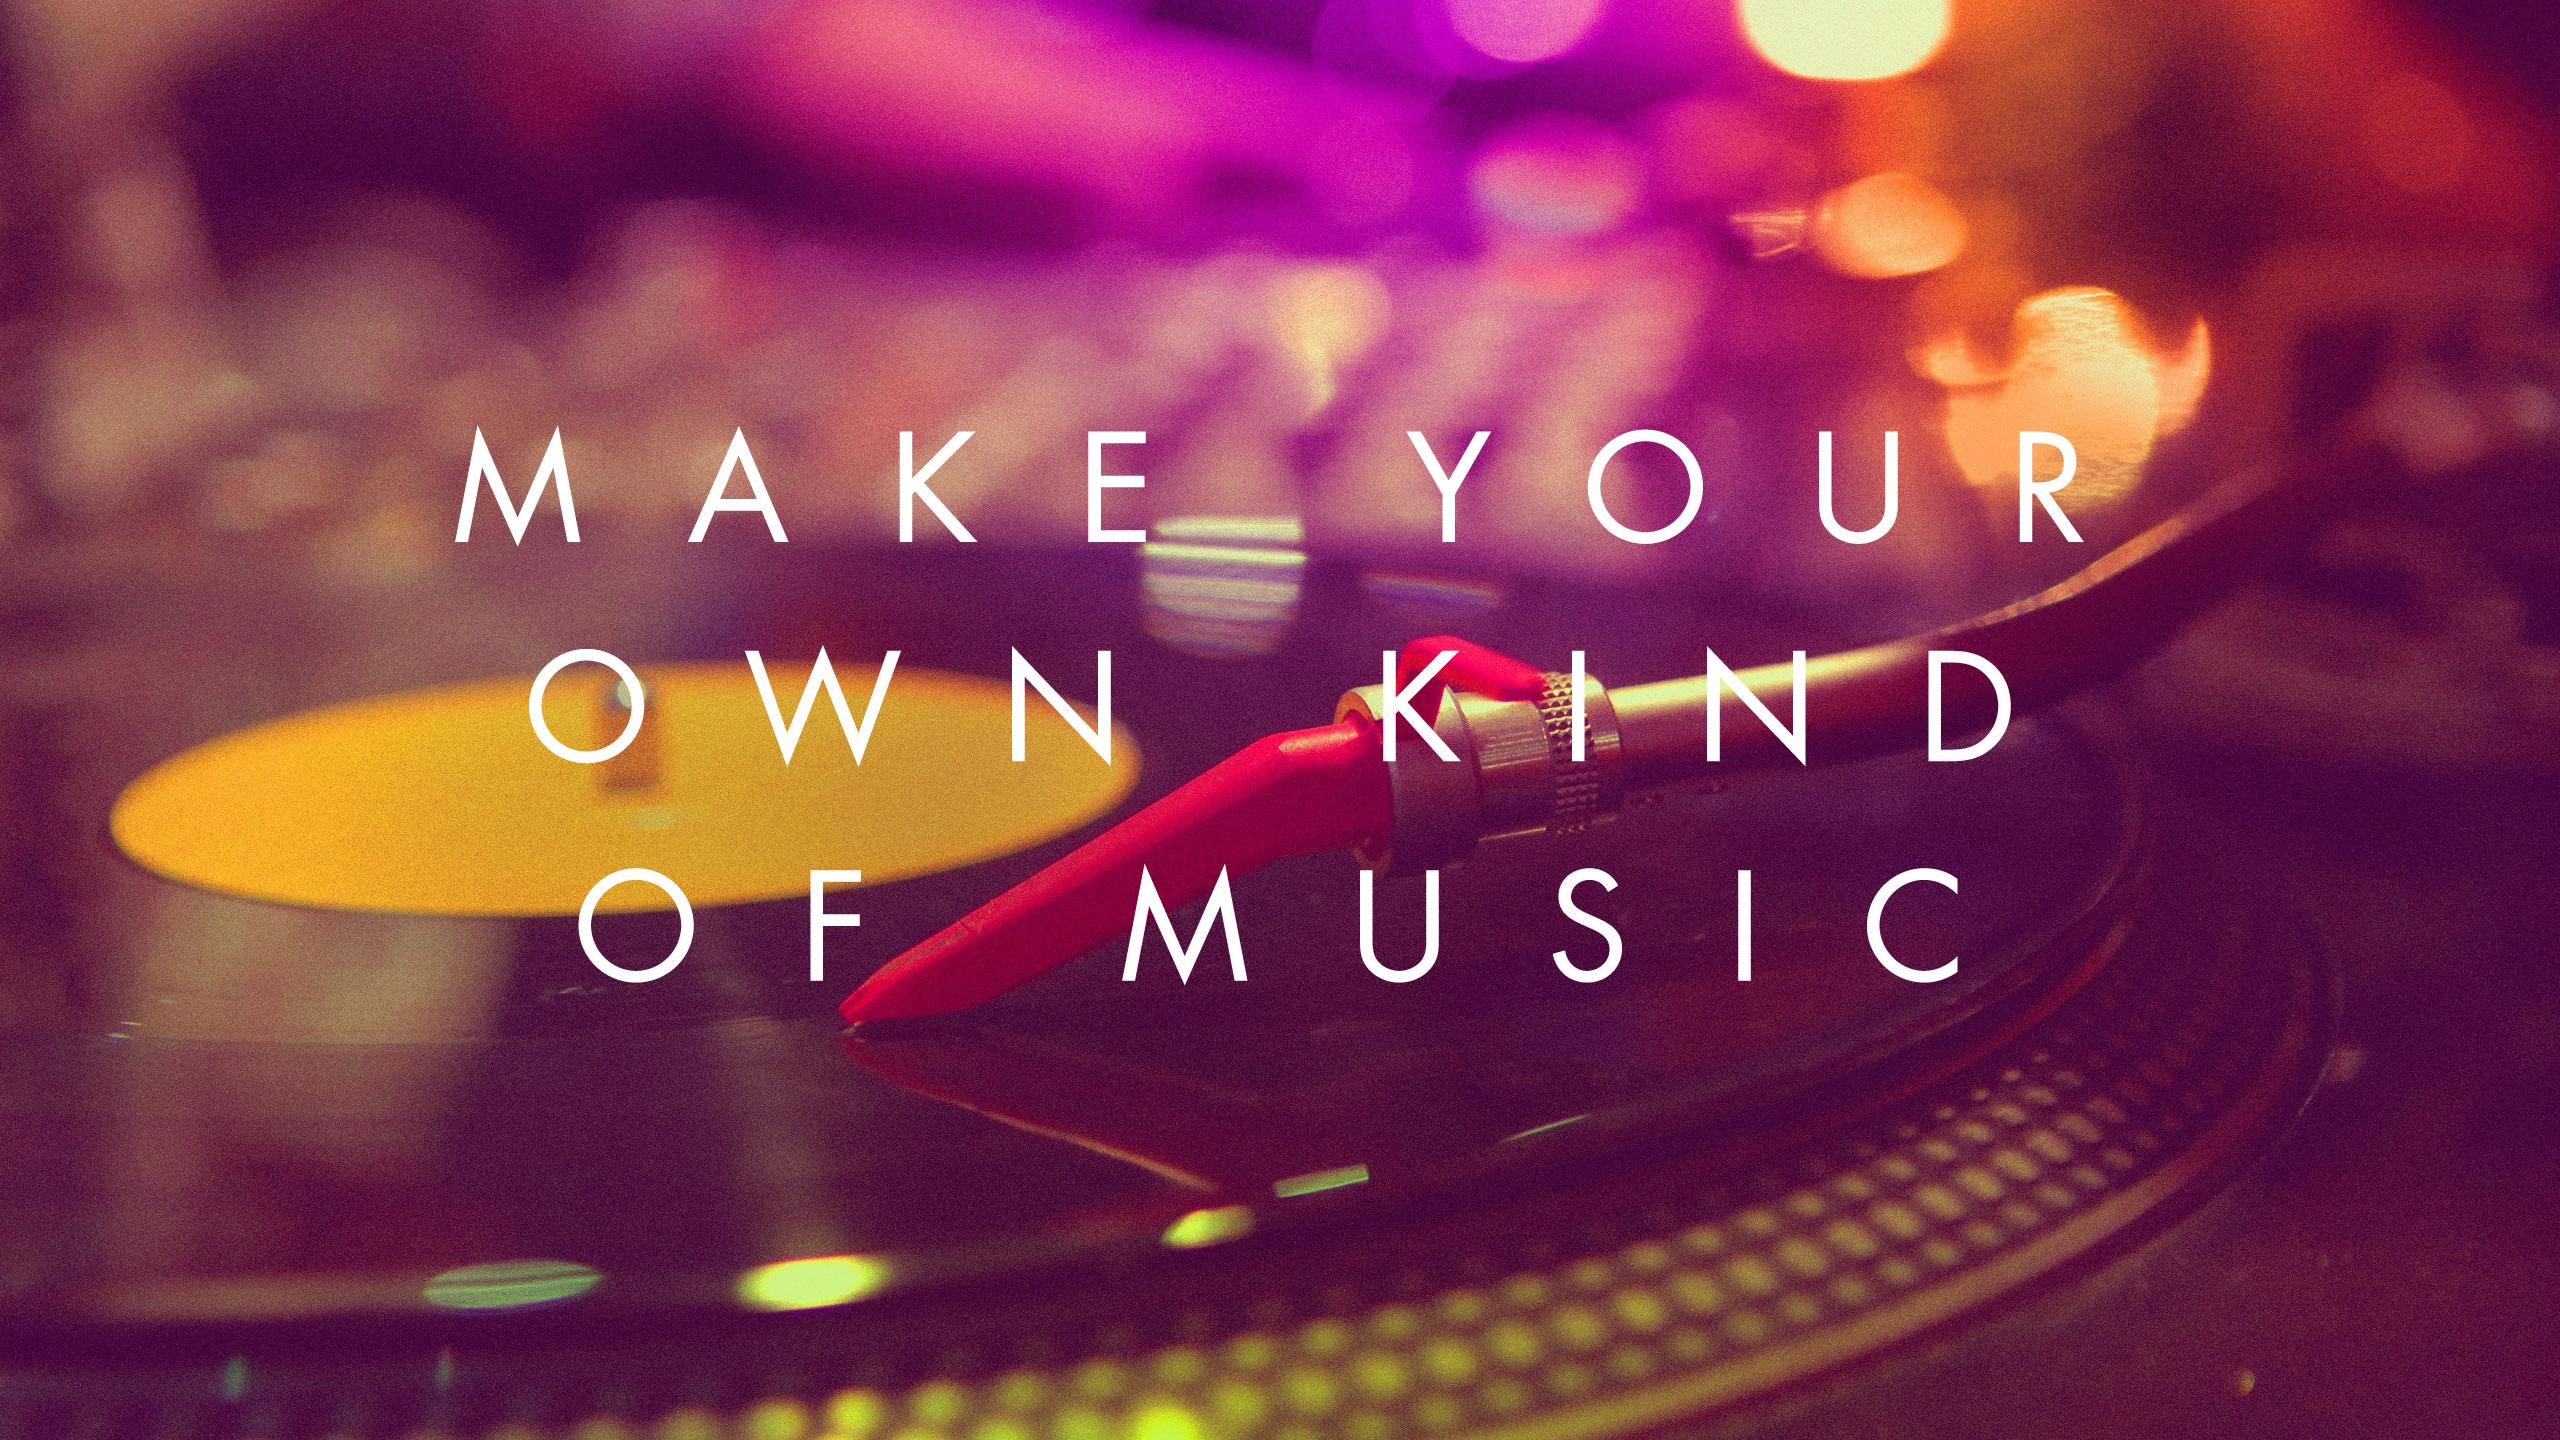 Make Your Own Kind Of Music Quotes